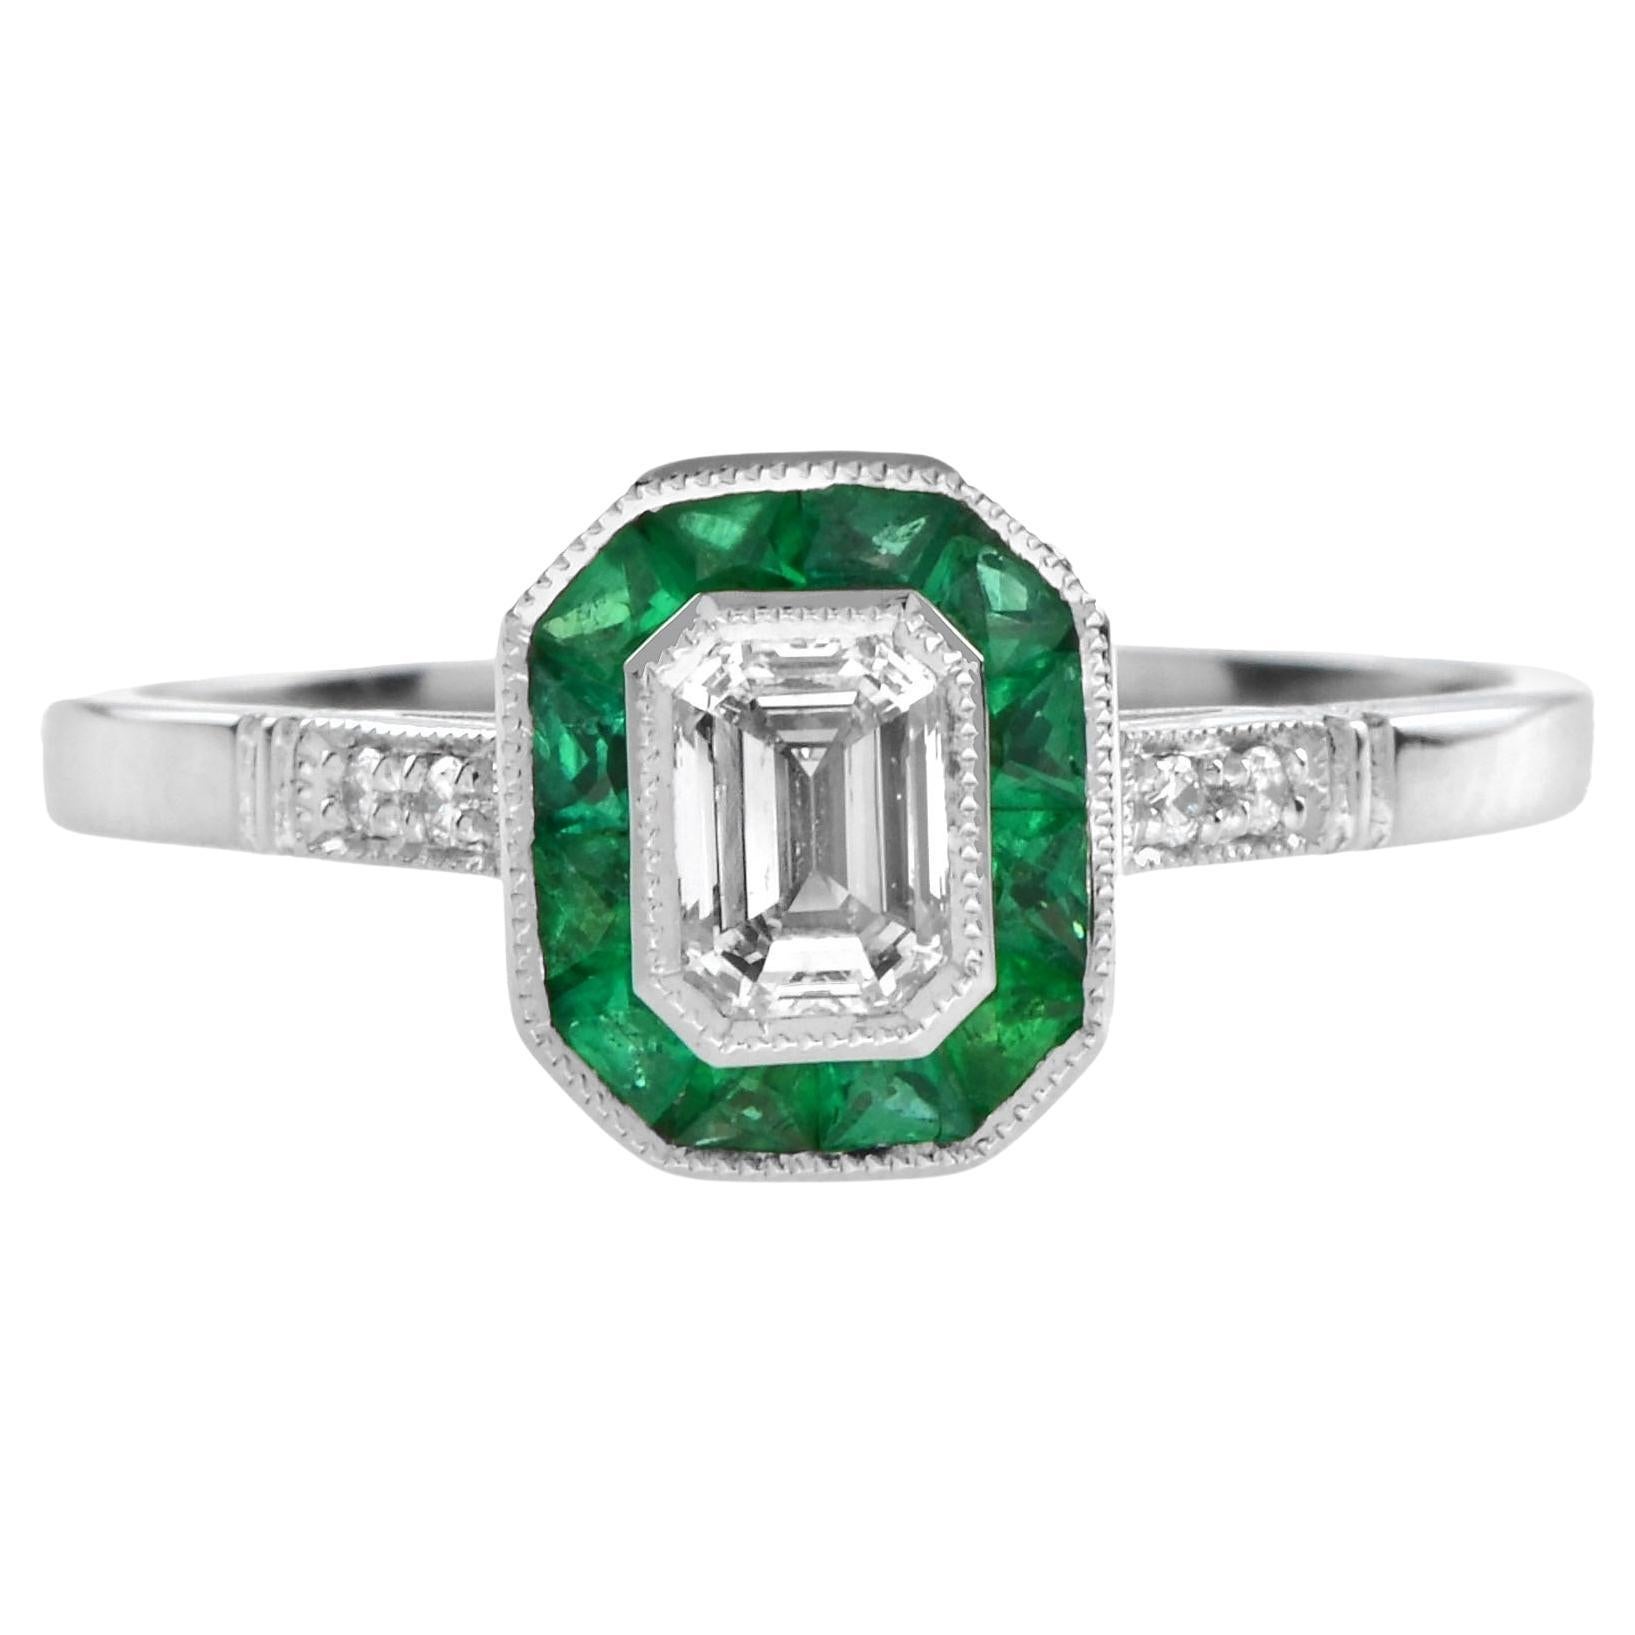 For Sale:  Emerald Cut Diamond and Emerald Art Deco Style Engagement Ring in 18K White Gold